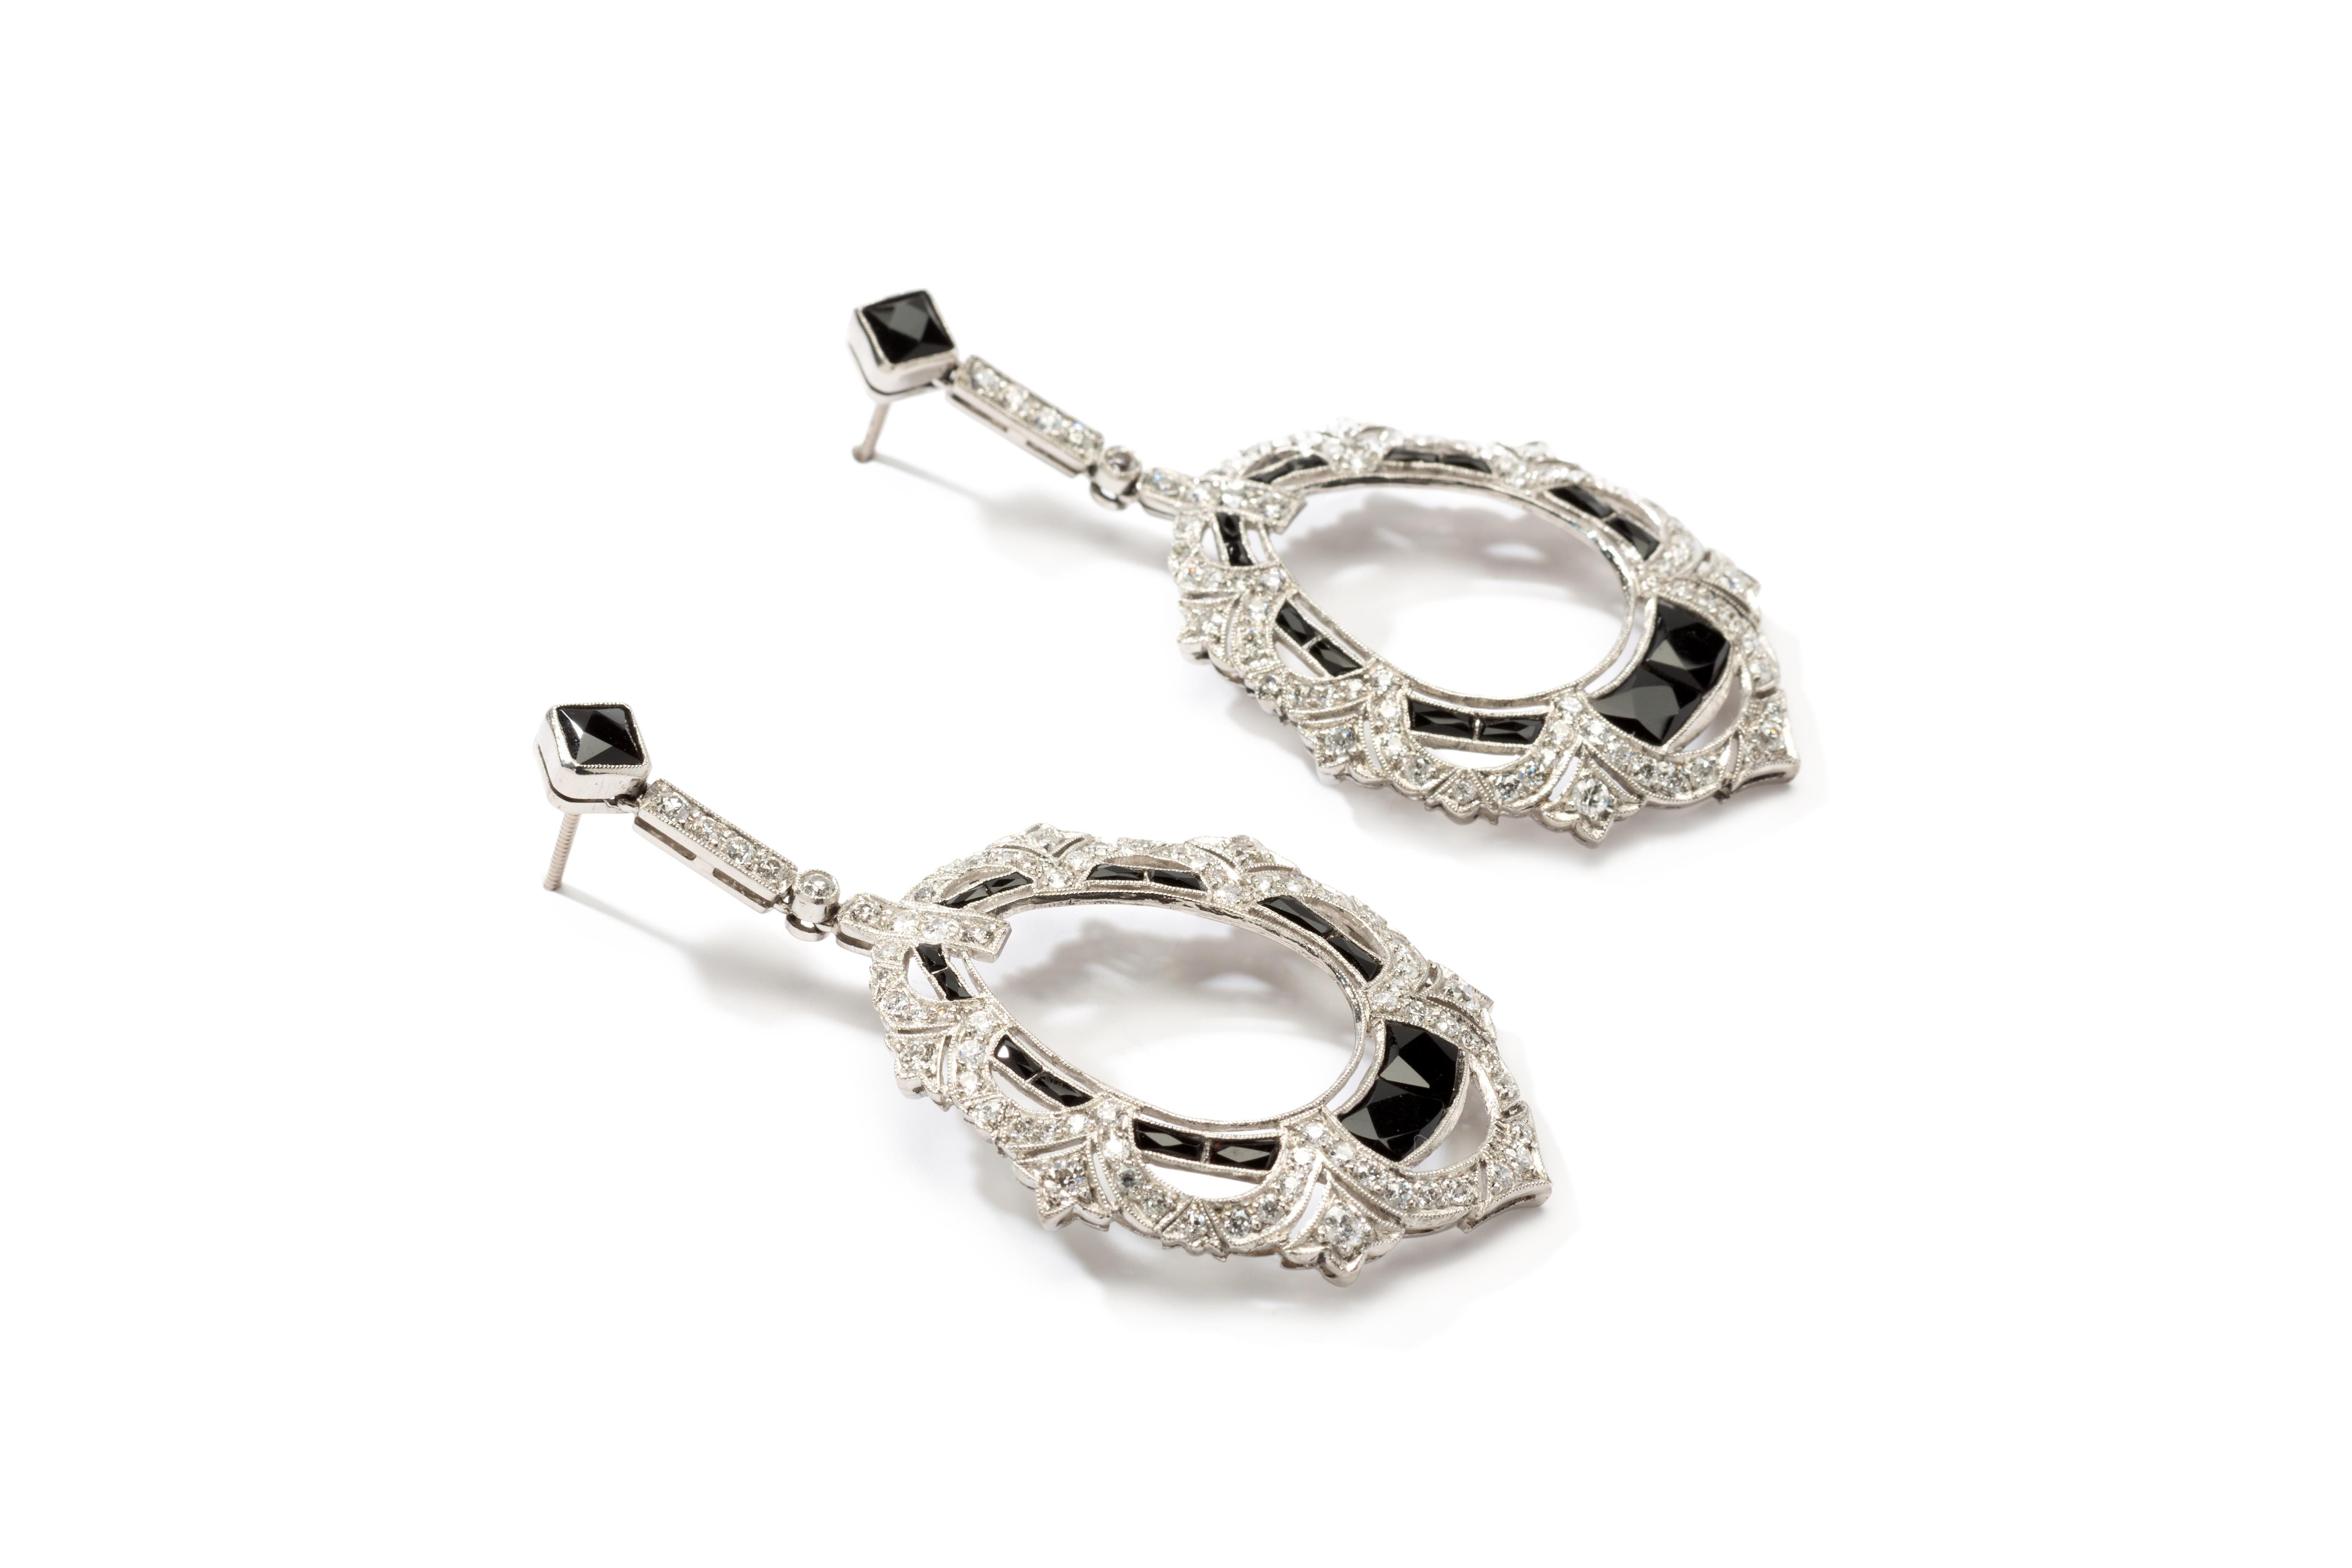 Pair of platinum openwork dangle earrings with 196 old-mine-cut diamonds ( ca. 5,3 carats ) and 30 onyx. Measurements: Length: 2.28 in ( 5,8 cm ), Width: 0.87 in ( 2,2 cm )
